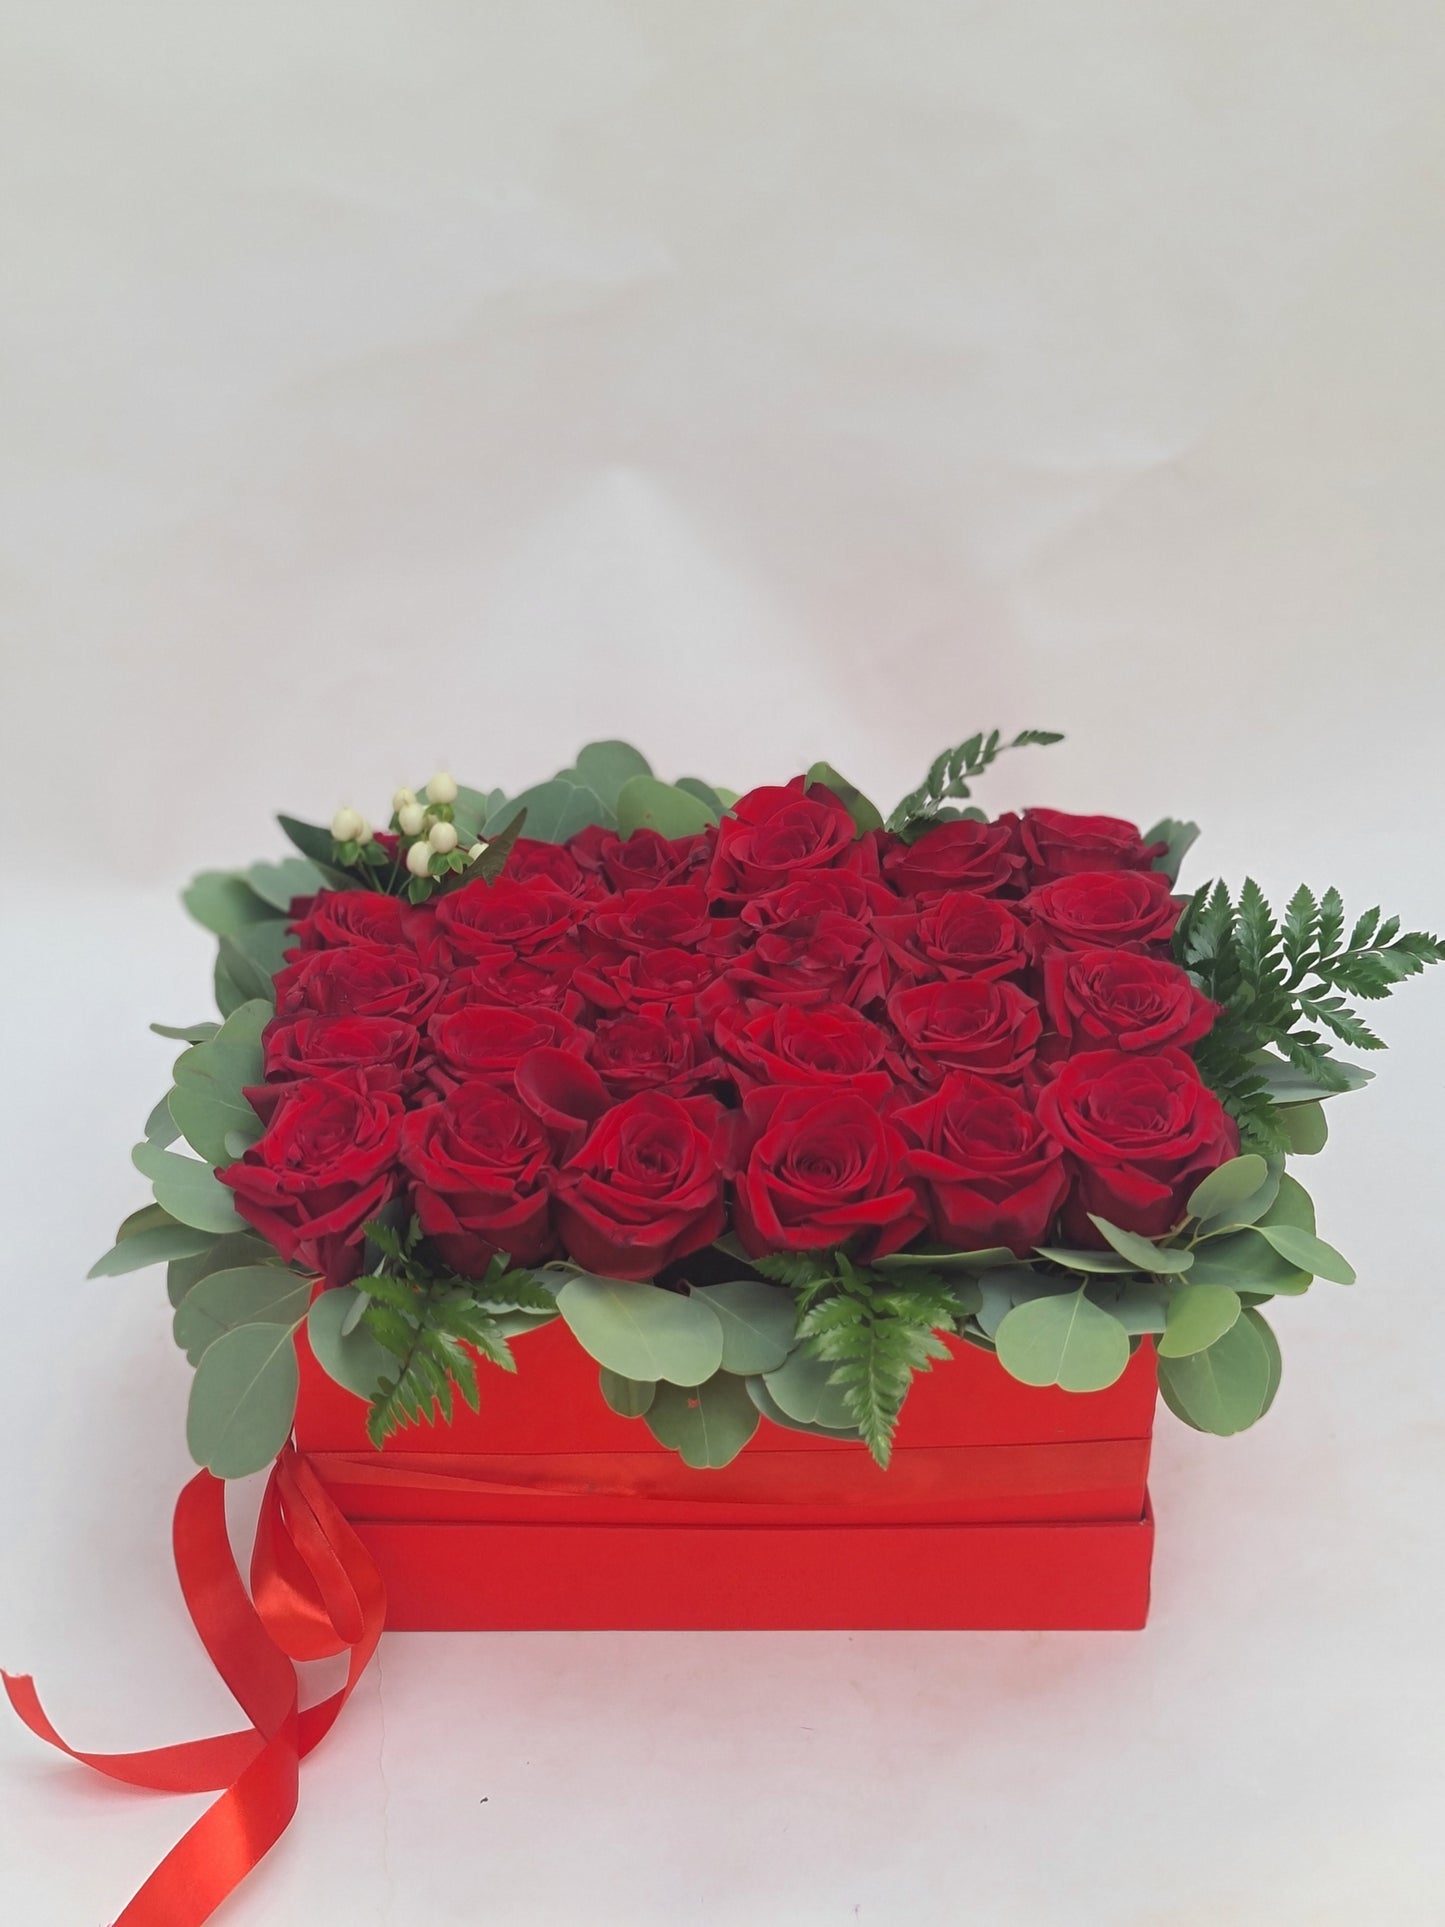 BOX OF RED ROSES WITH GREEN FILLERS.